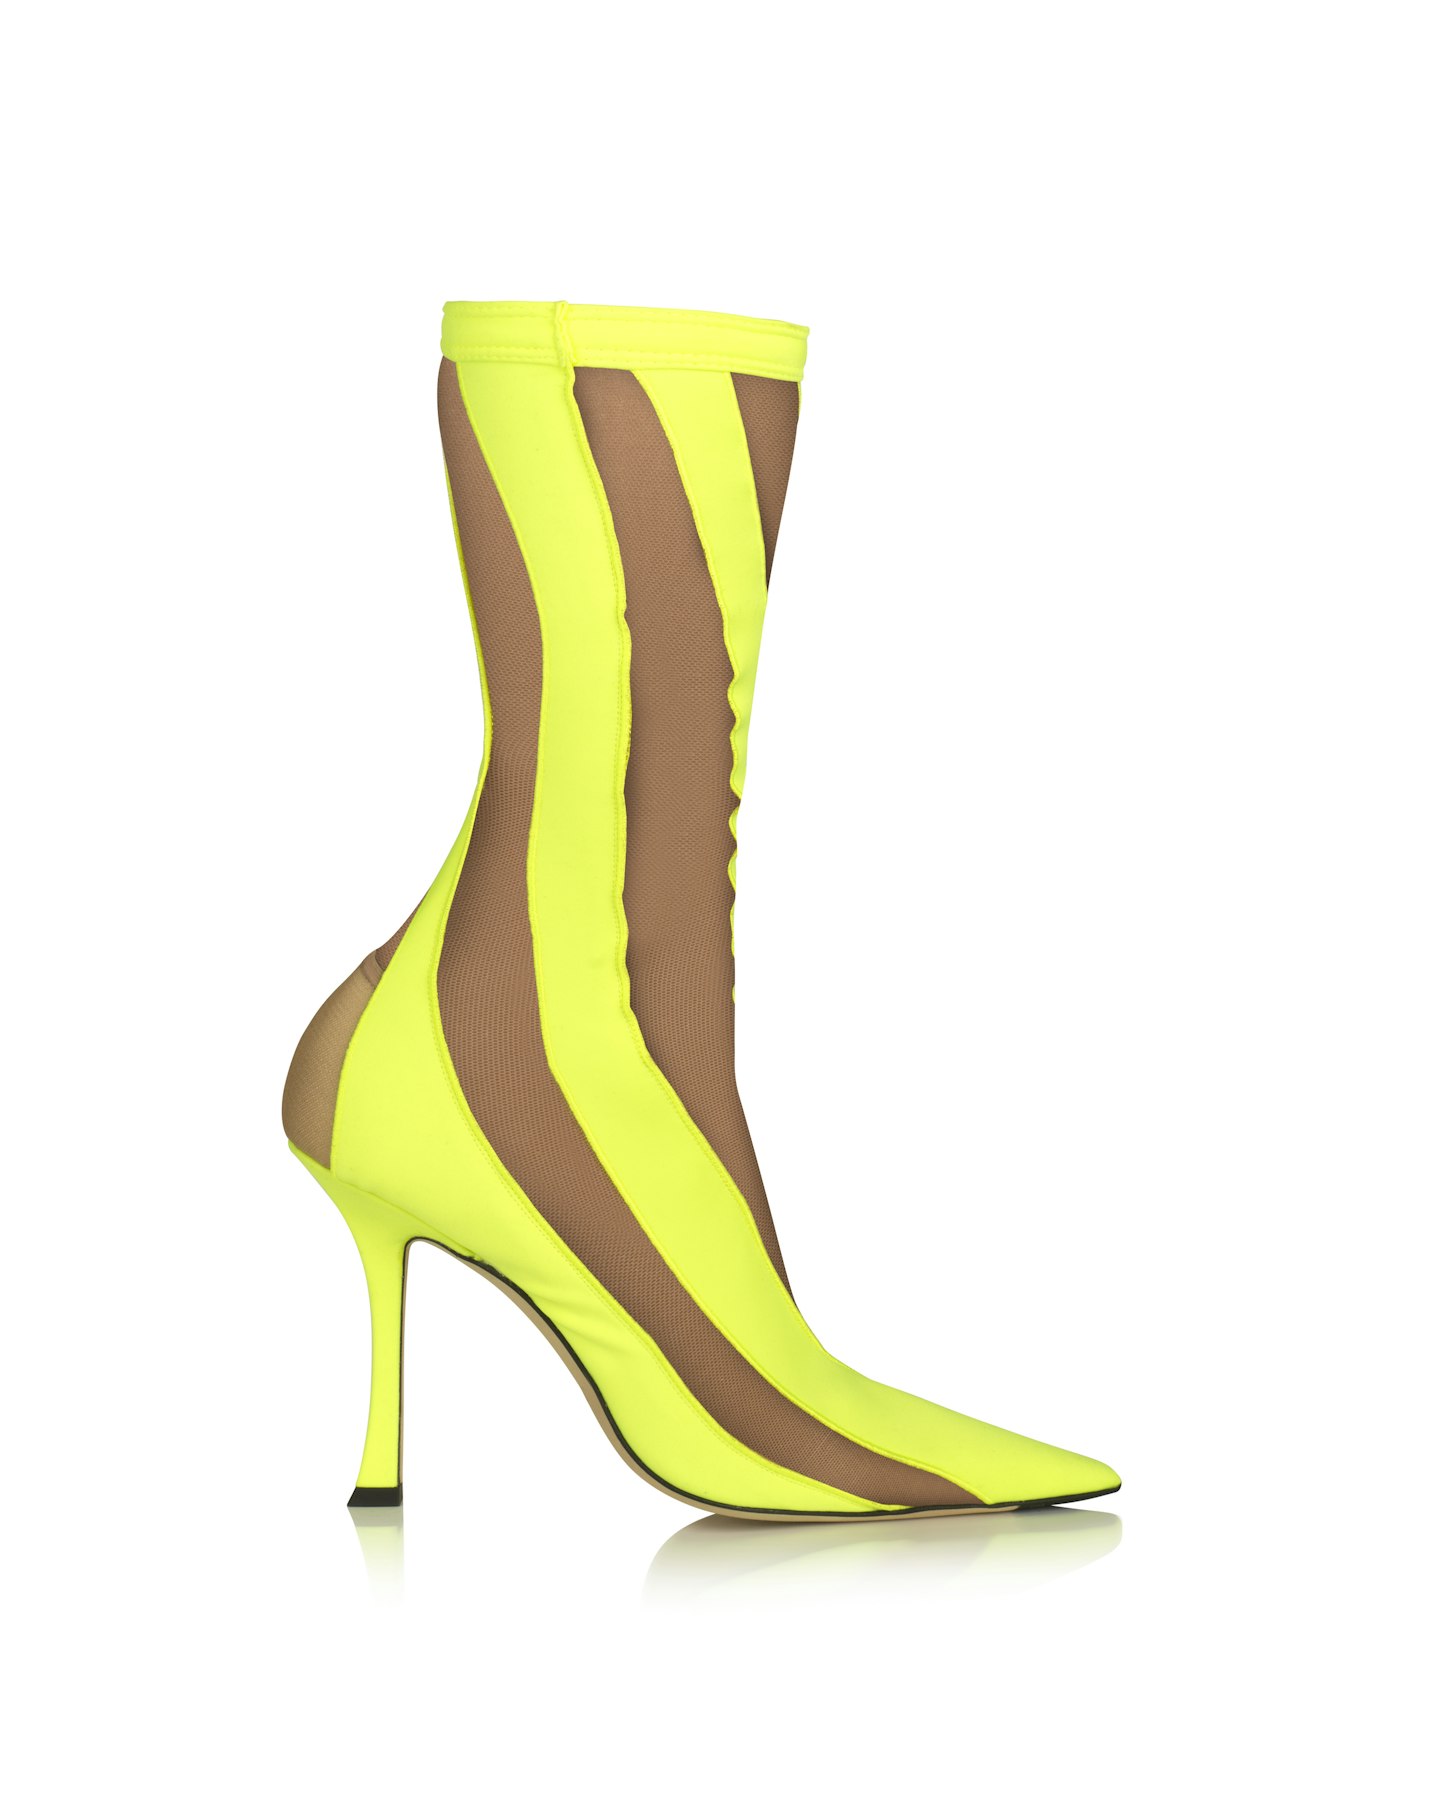 Jimmy Choo Mugler BOOT Neon Yellow and Nude Sheer Spiral Stretch Fabric Sock Ankle Boots, £1,050